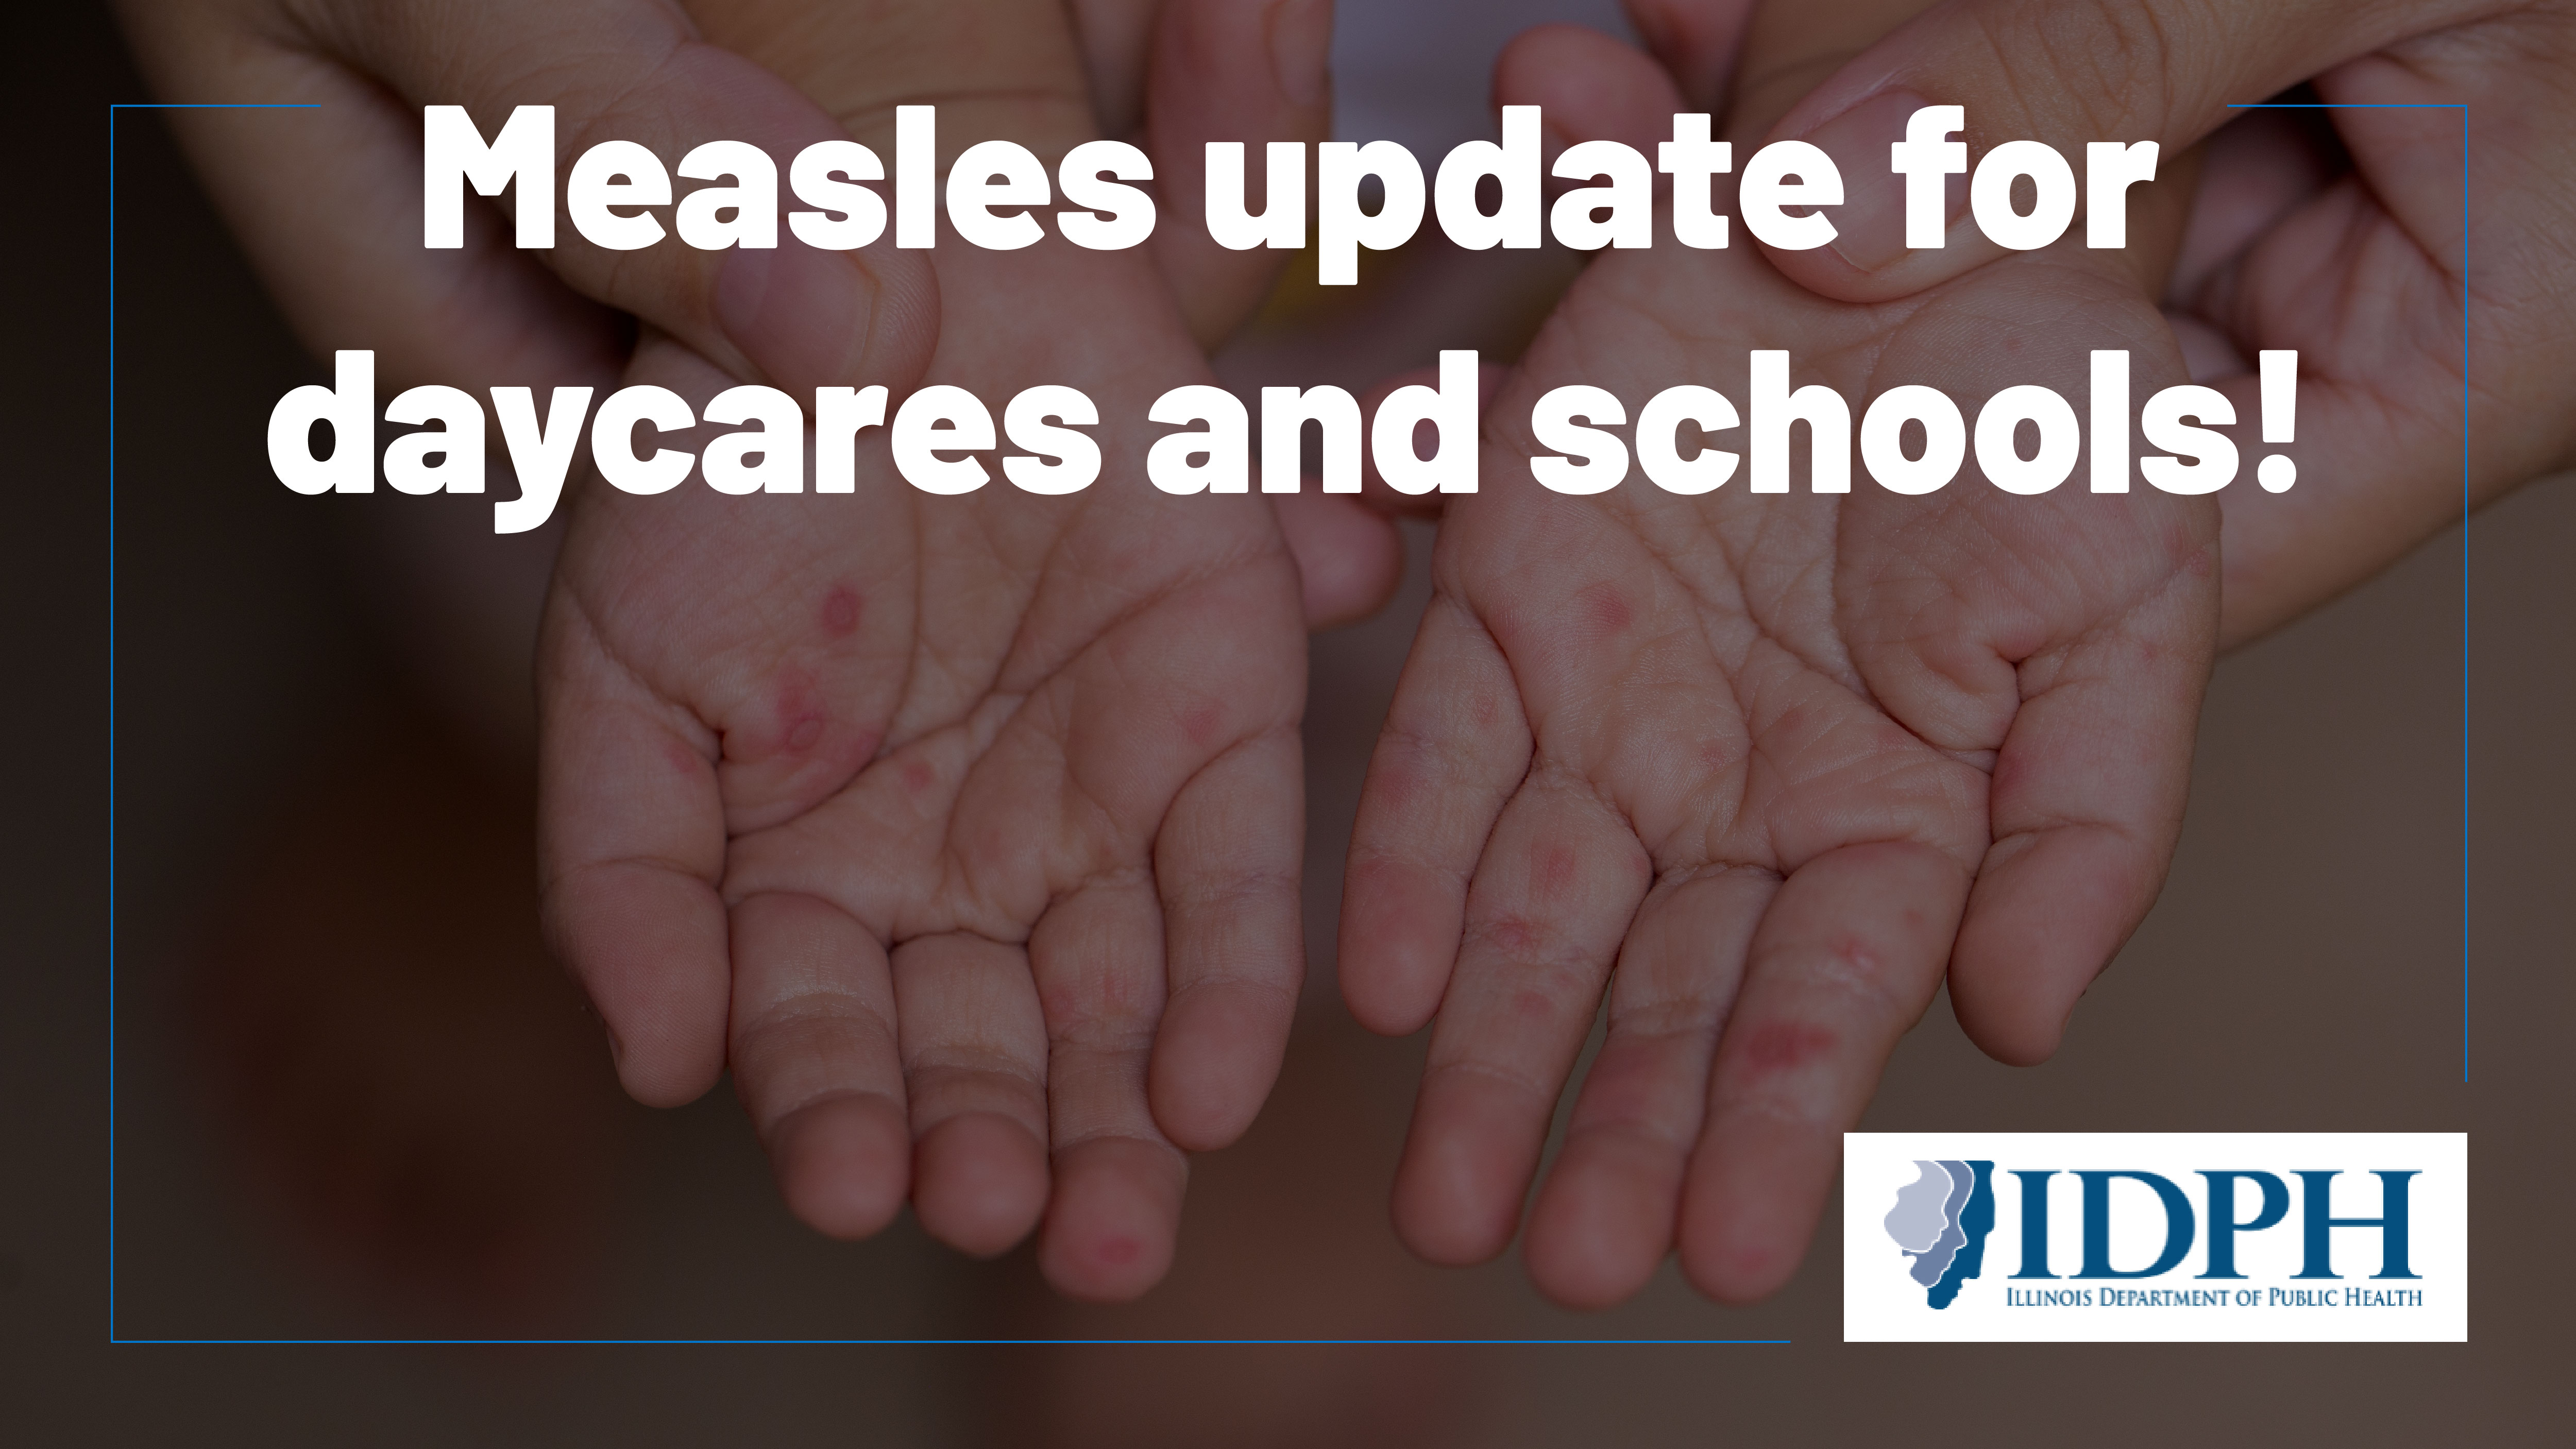 Measles update for daycares and schools! image of hands with red rash spots. Illinois Department of Public Health logo